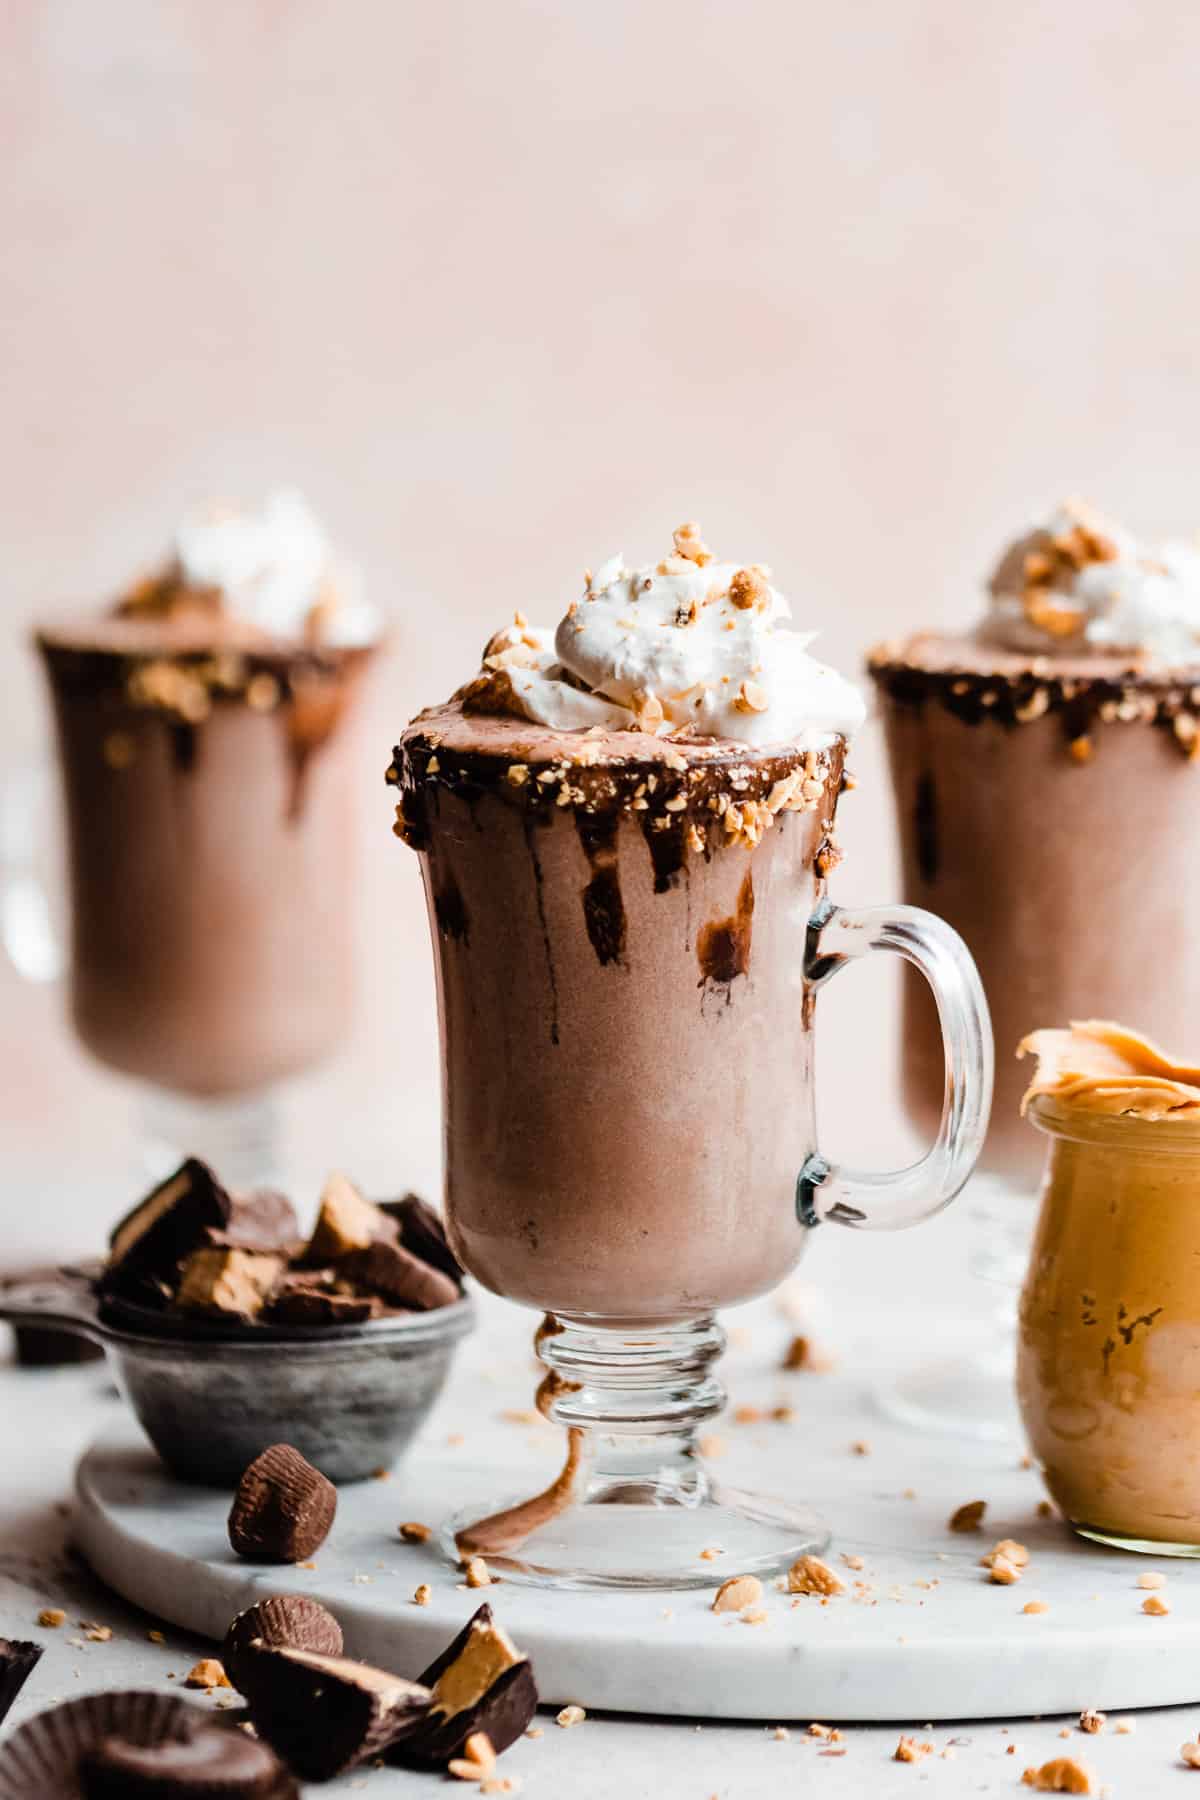 Milkshakes in glasses with chocolate dipped rims and whipped cream on top.